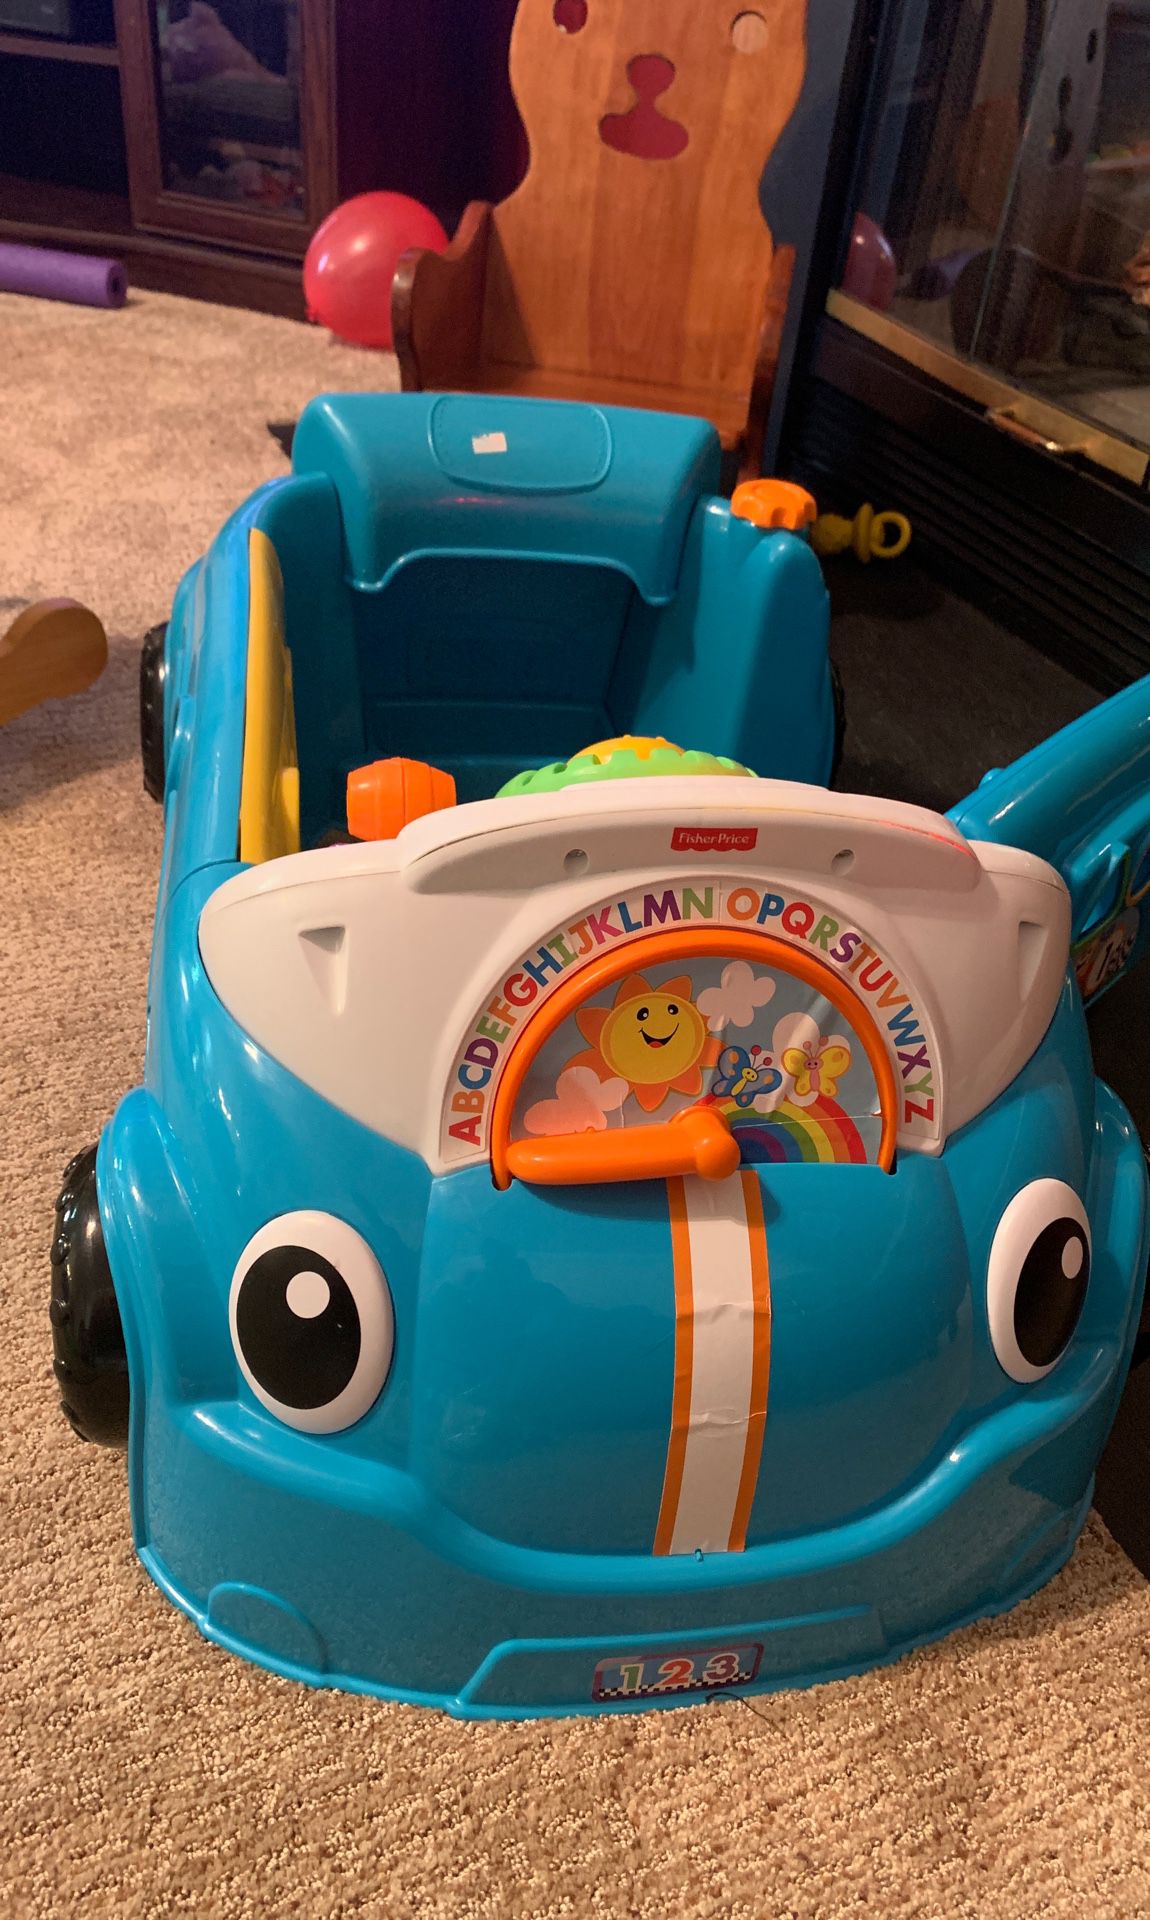 Baby/toddler learning car toy